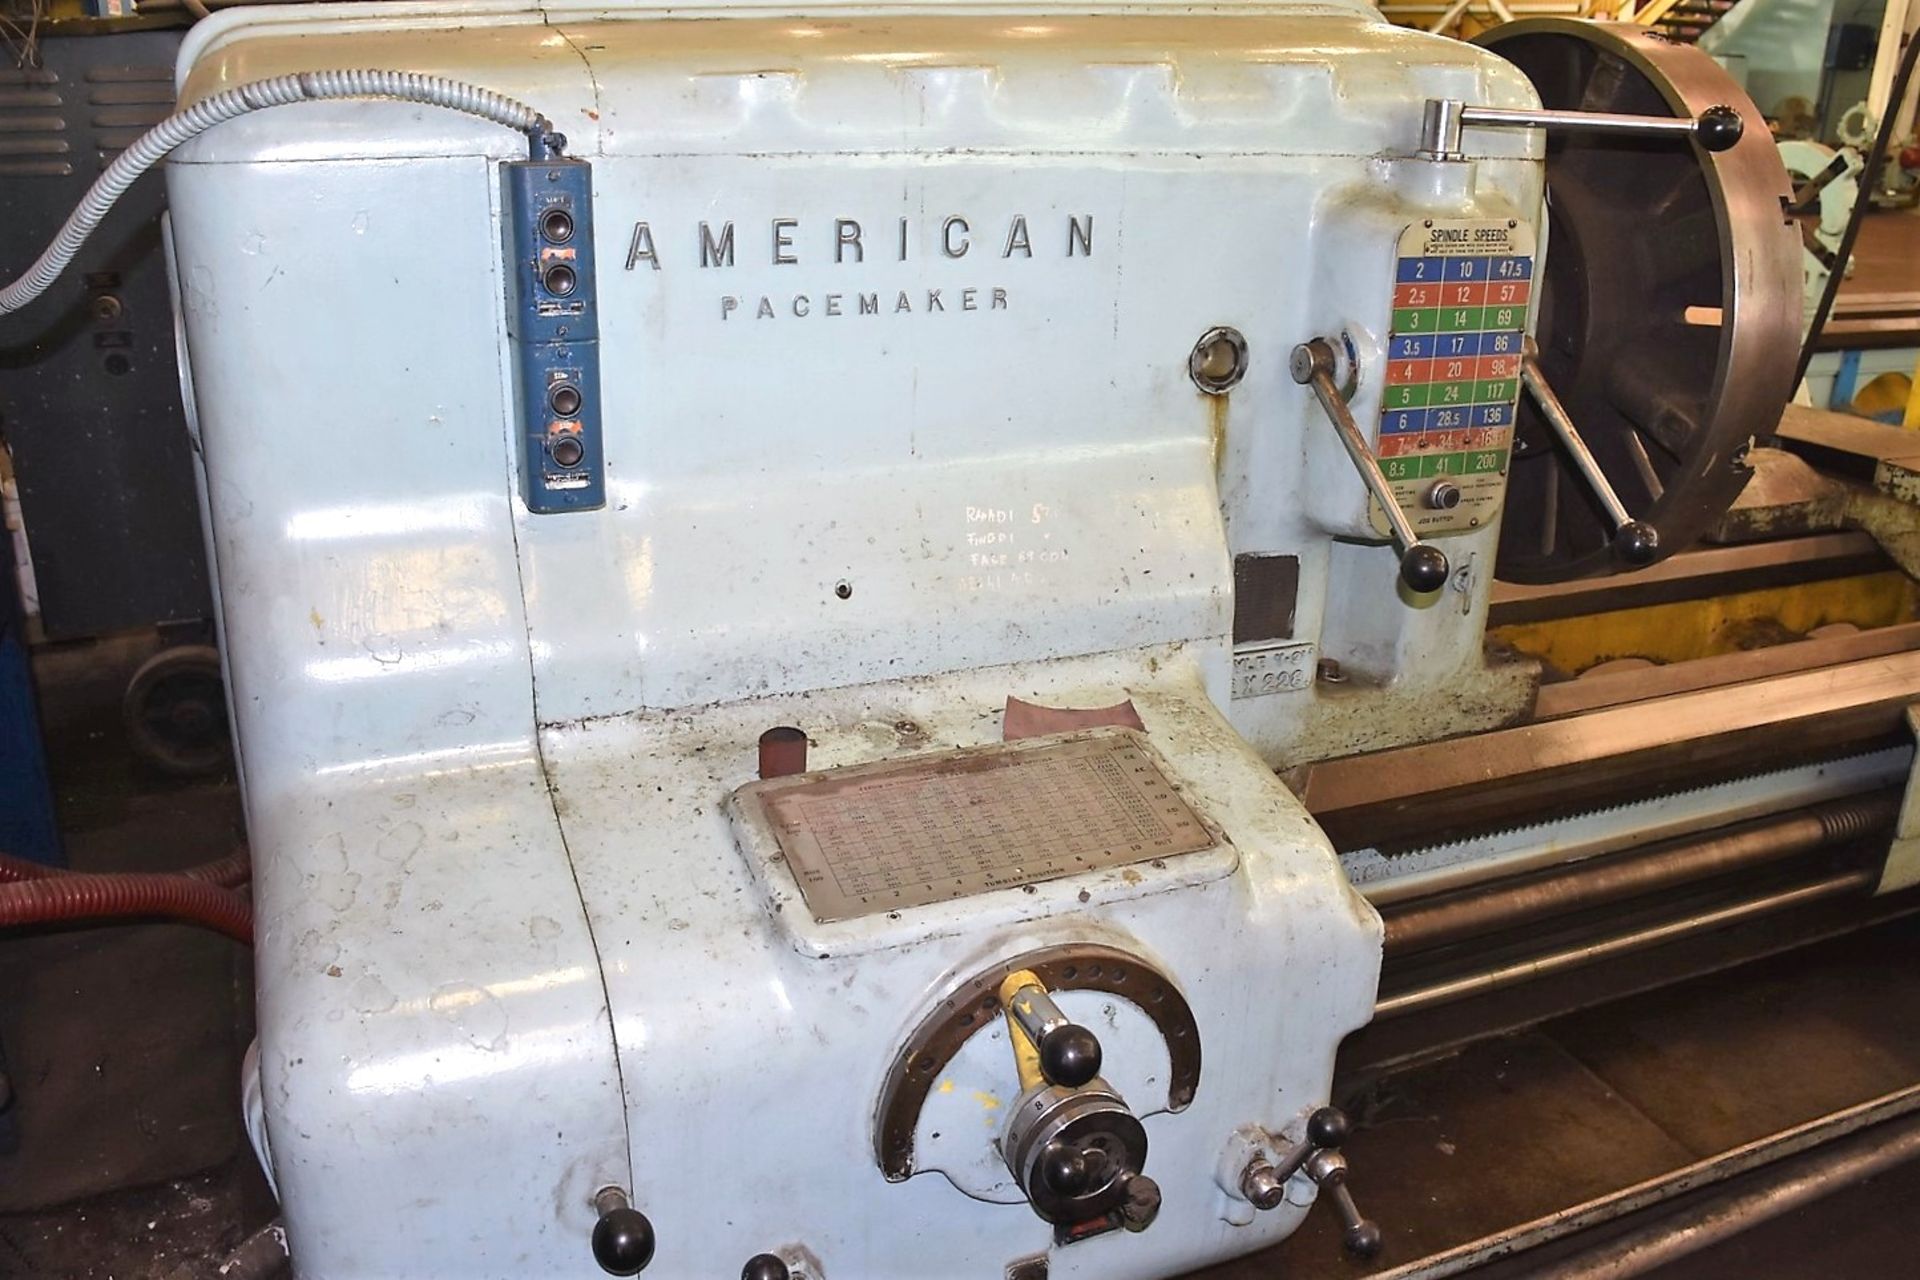 American Pacemaker 42" x 228" Manual Lathe - Image 2 of 7